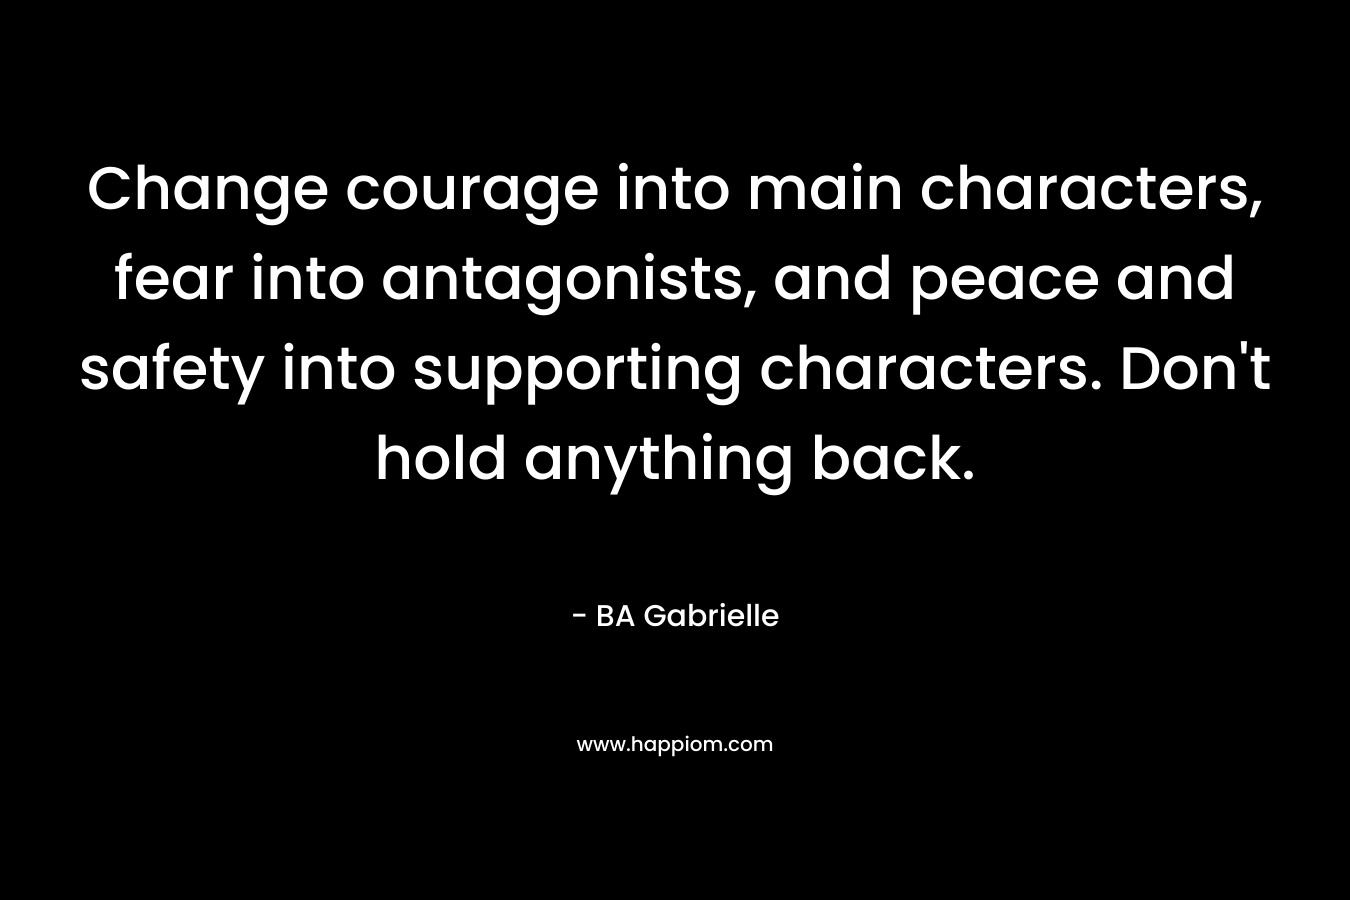 Change courage into main characters, fear into antagonists, and peace and safety into supporting characters. Don't hold anything back.